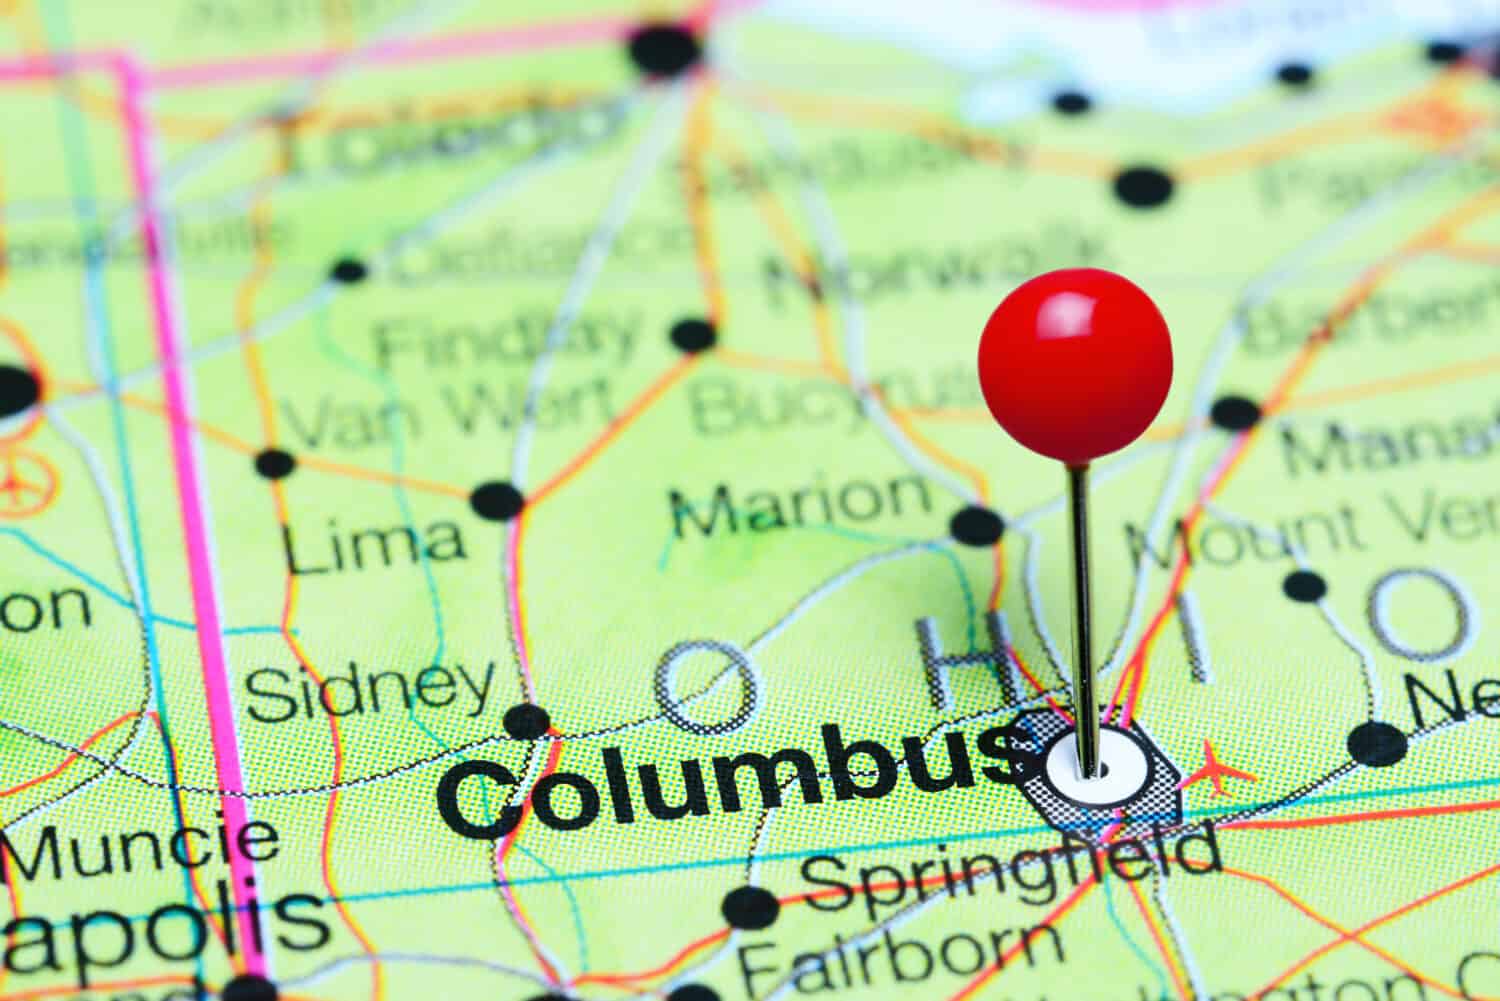 Columbus pinned on a map of Ohio, USA